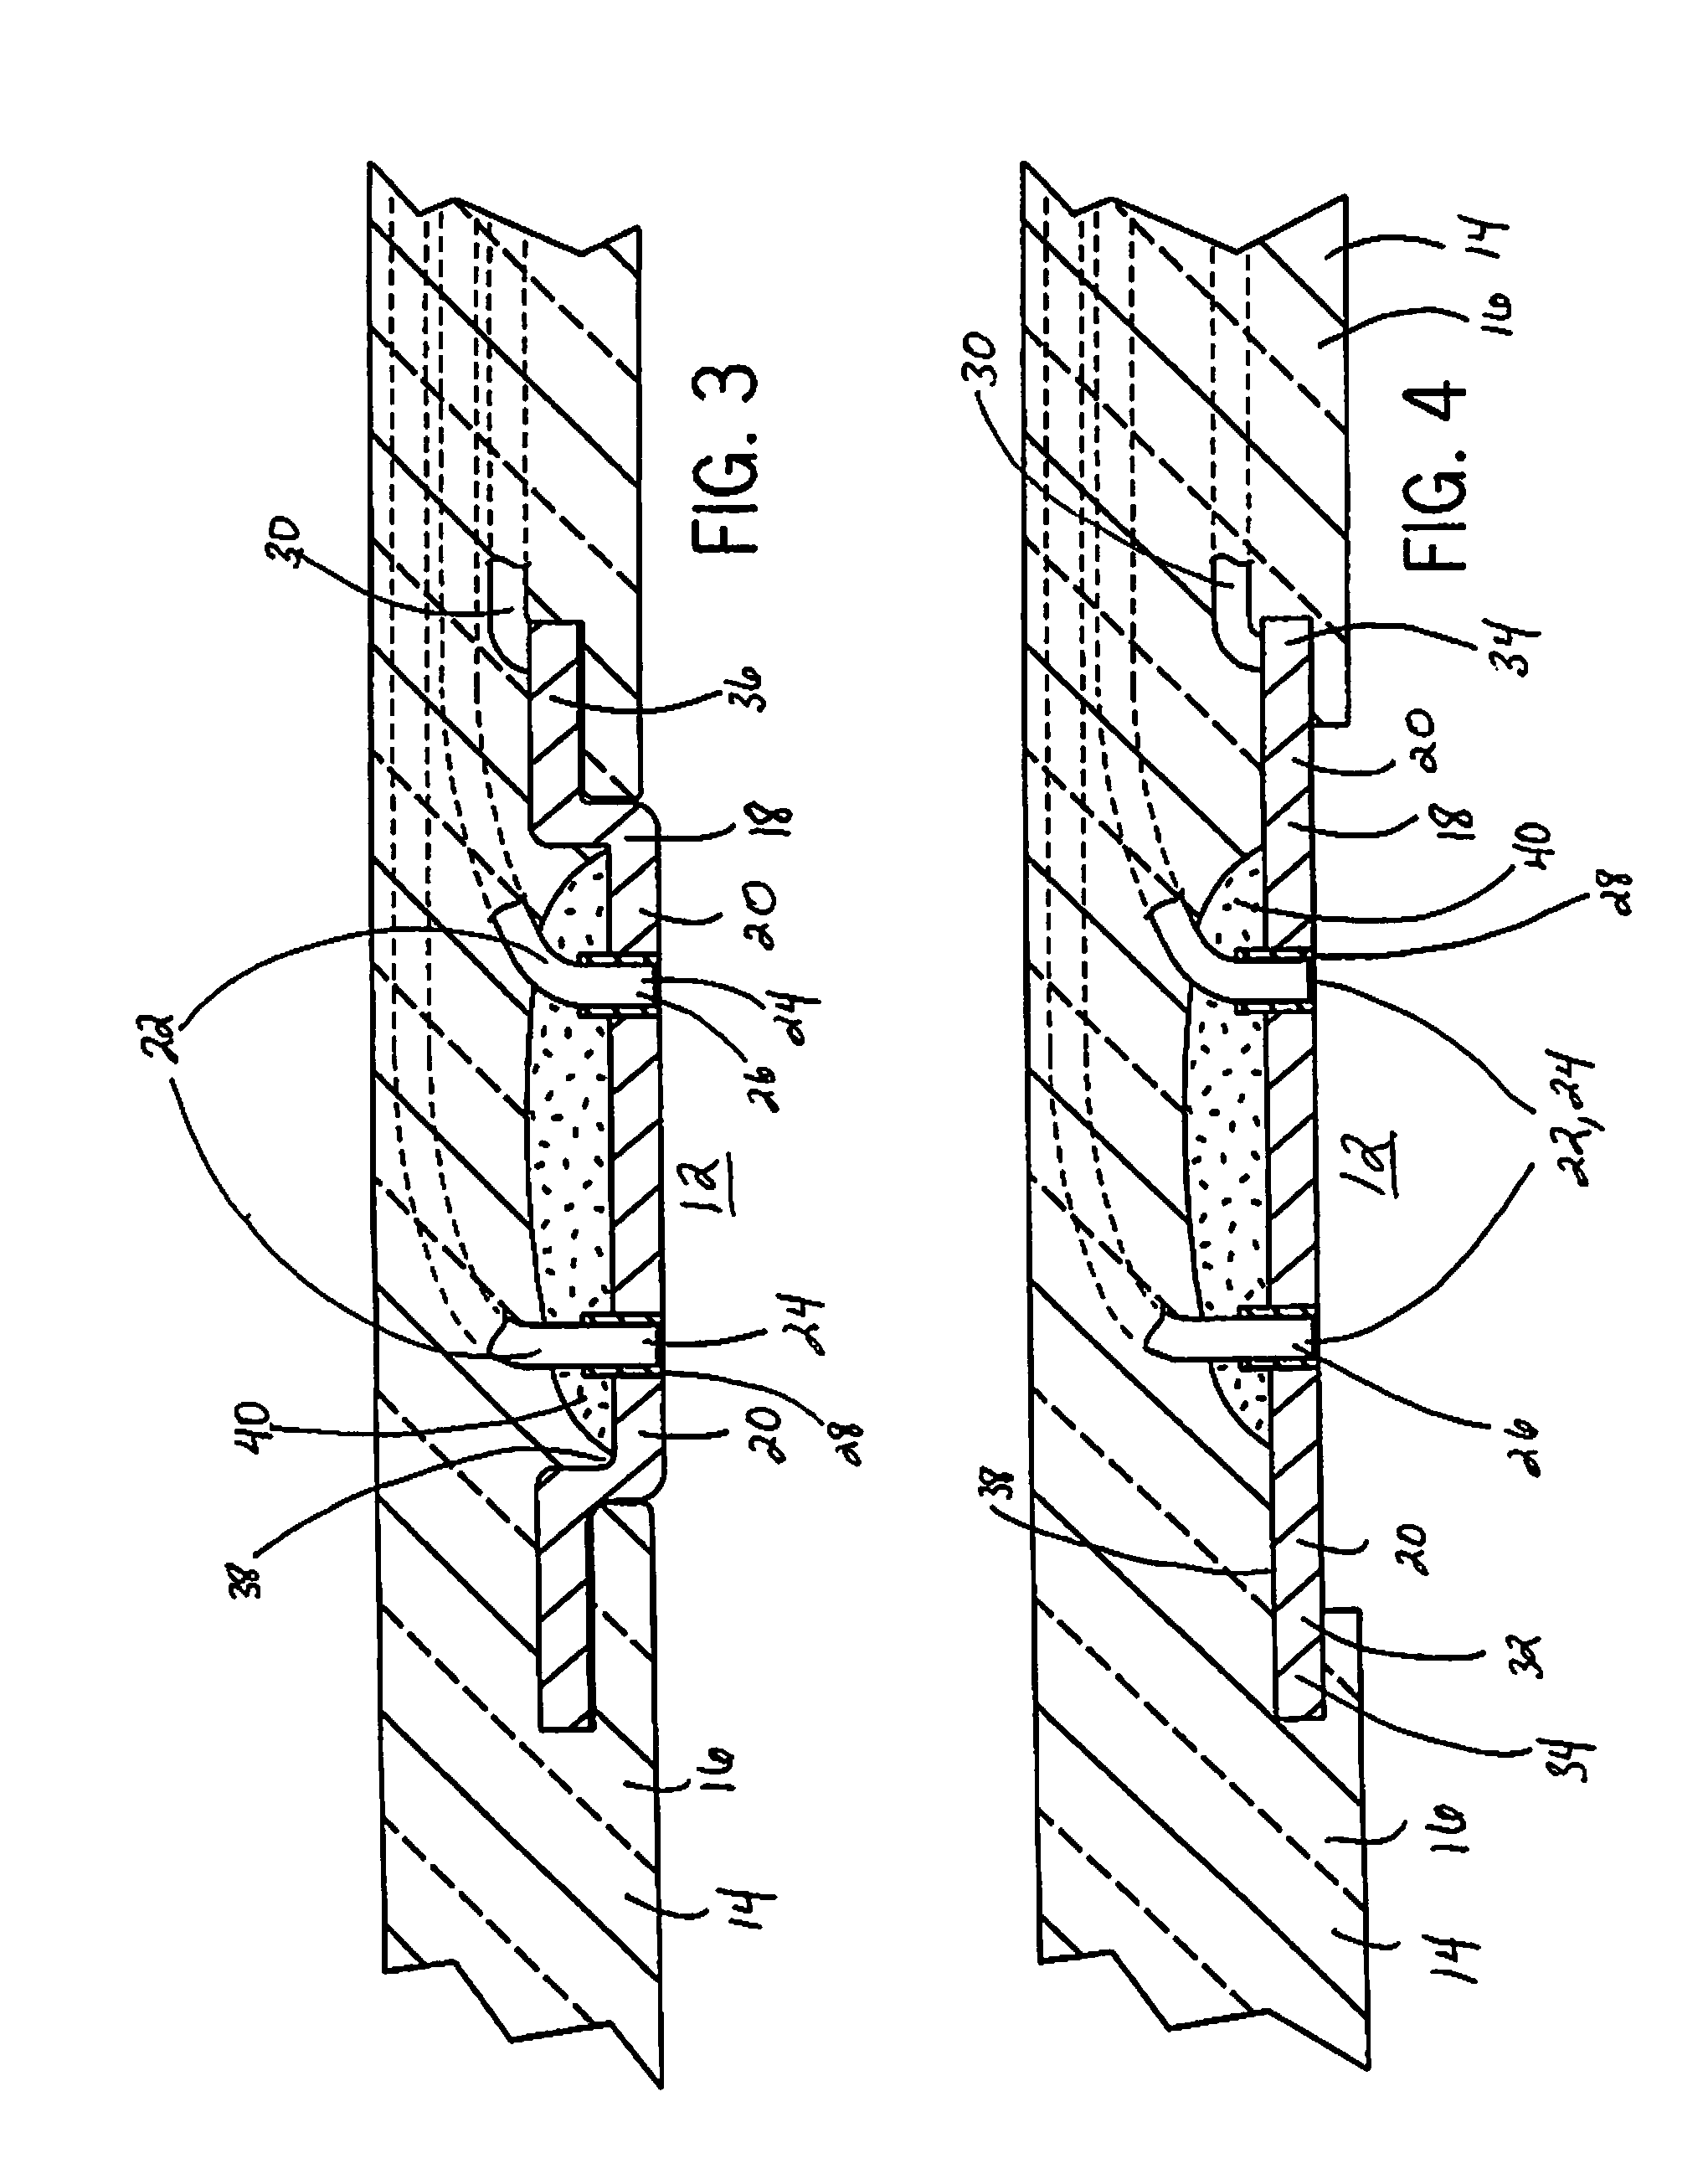 Intracranial sensing & monitoring device with macro and micro electrodes